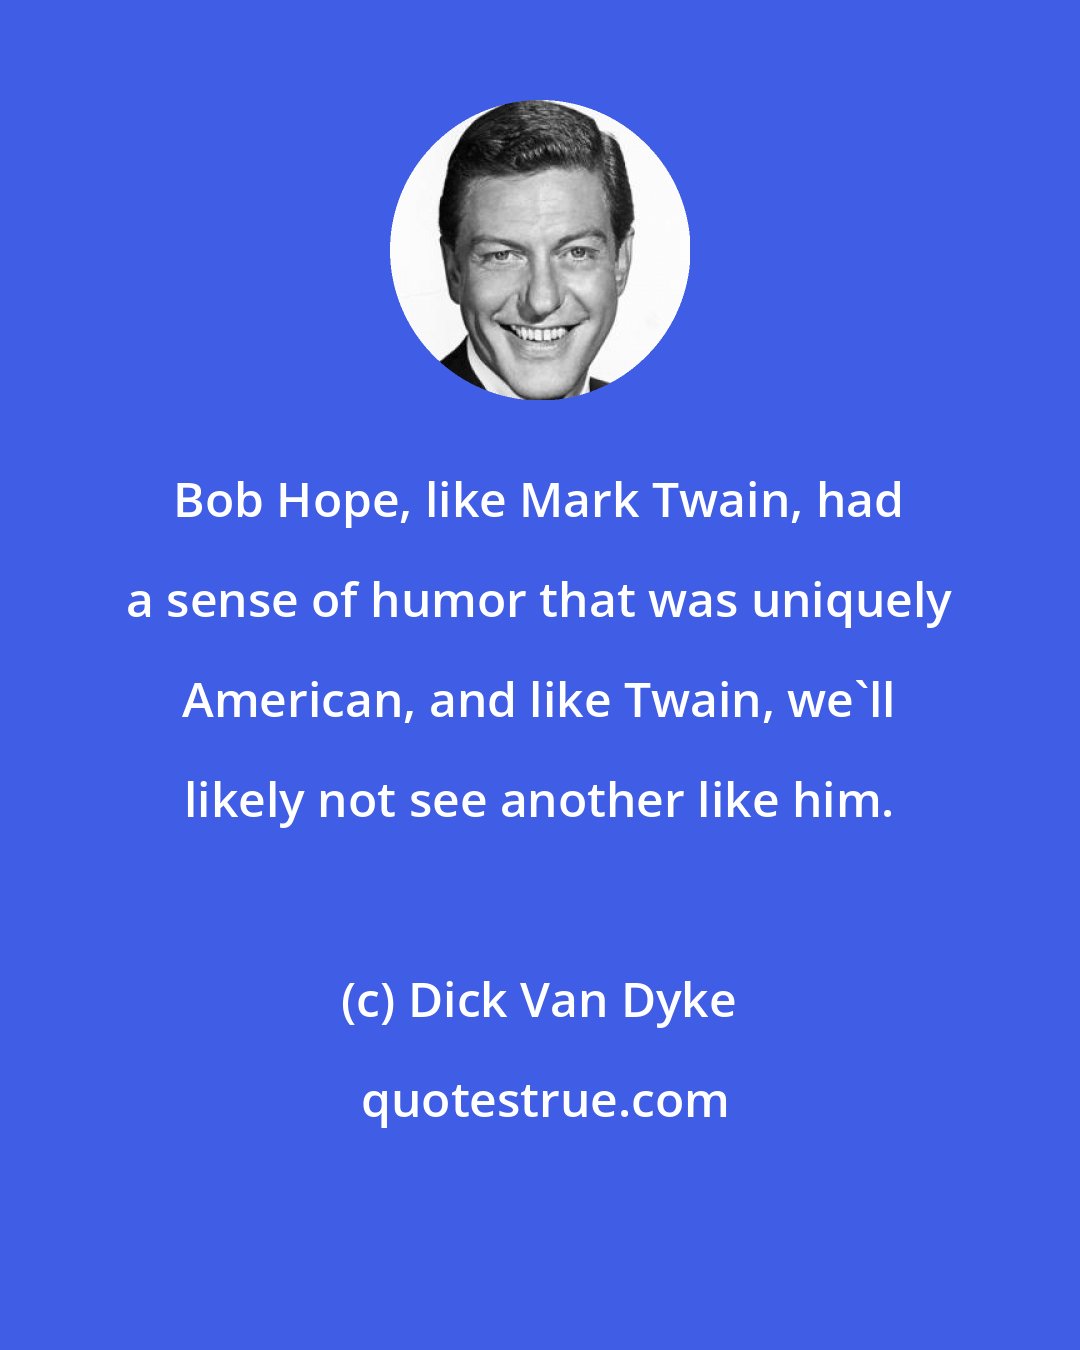 Dick Van Dyke: Bob Hope, like Mark Twain, had a sense of humor that was uniquely American, and like Twain, we'll likely not see another like him.